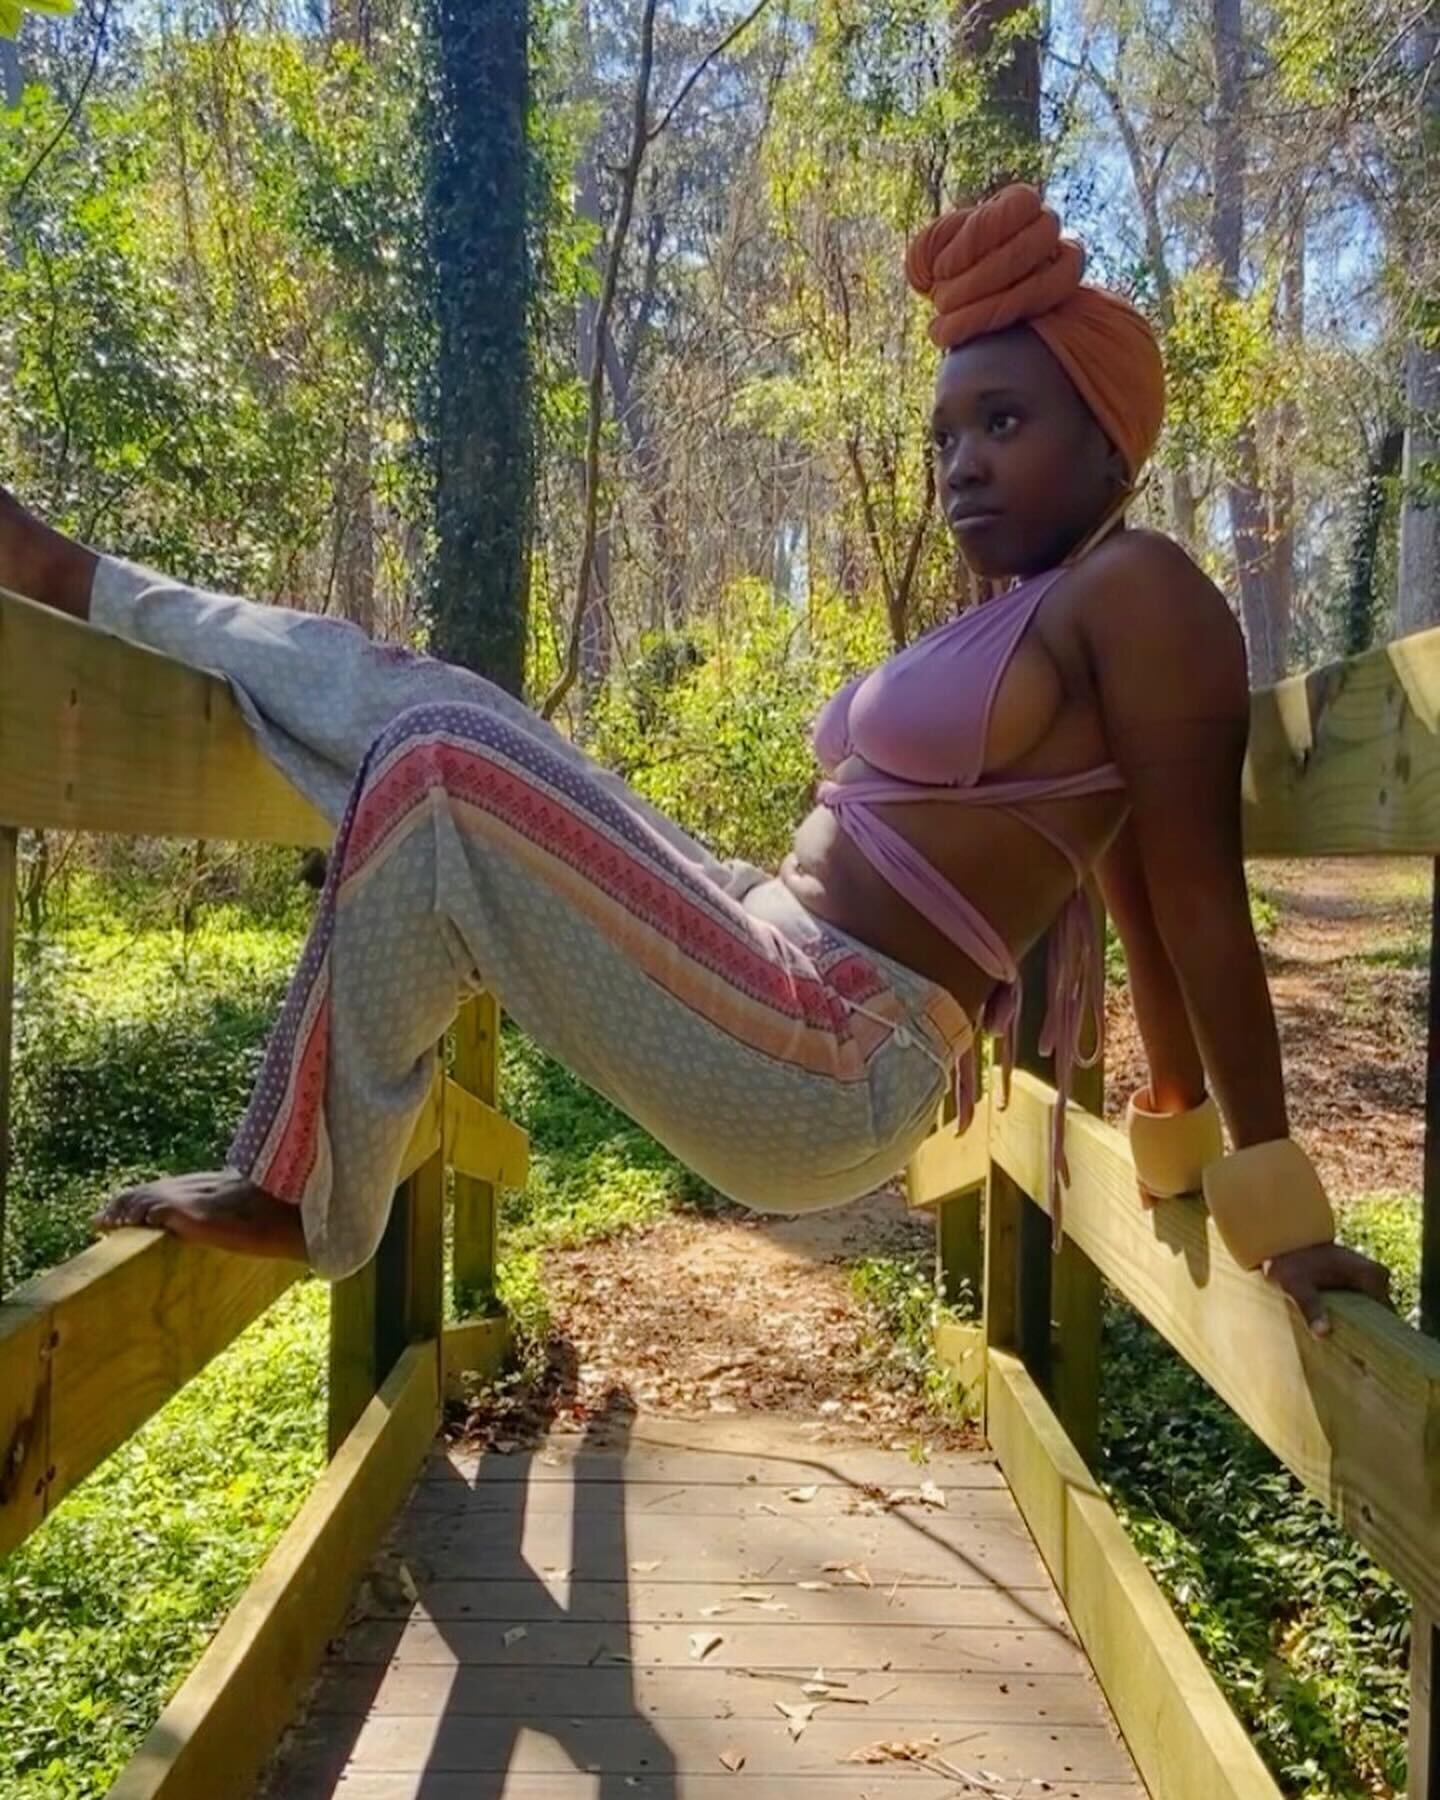 My Yoni Said: &ldquo;Start back trusting your intuition &amp; stop letting toxic people reshape your connection with your womb. Never dim the light to your own inner guide.&rdquo; 

#myyonisaid